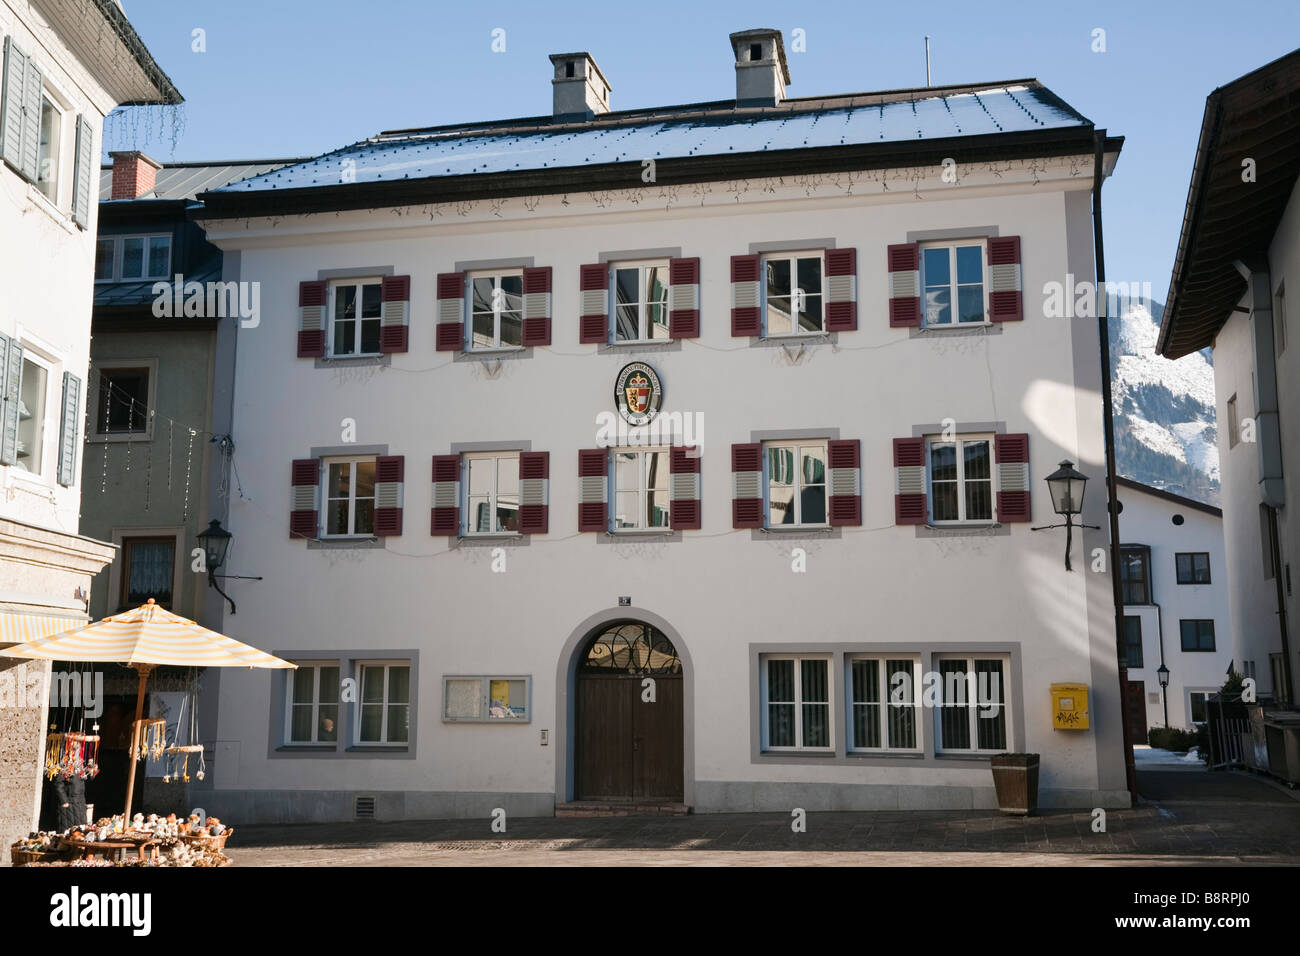 Zell am See Austria Europe Historic traditional Alpine building 5 Stadtplatz in town centre Stock Photo